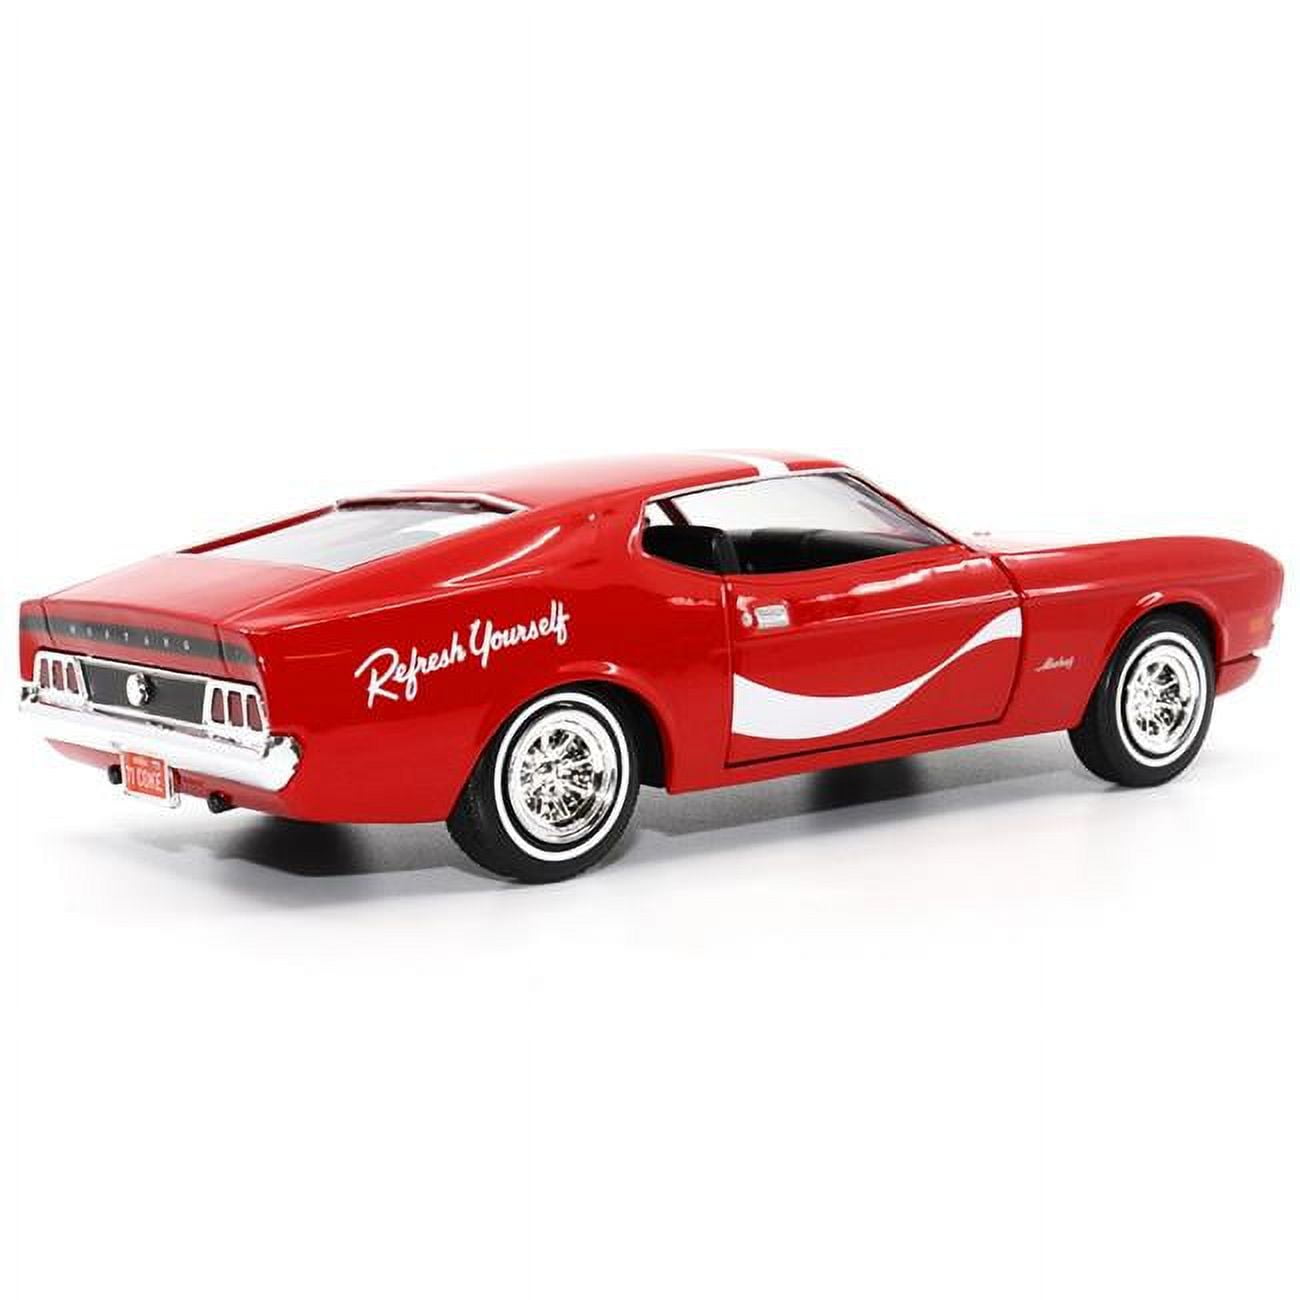 Motorcity Classics 424071 1971 Ford Mustang Sportsroof Red with White Stripes Refresh Yourself - Coca-Cola 1-24 Diecast Model Car -  MOTOR CITY CLASSICS